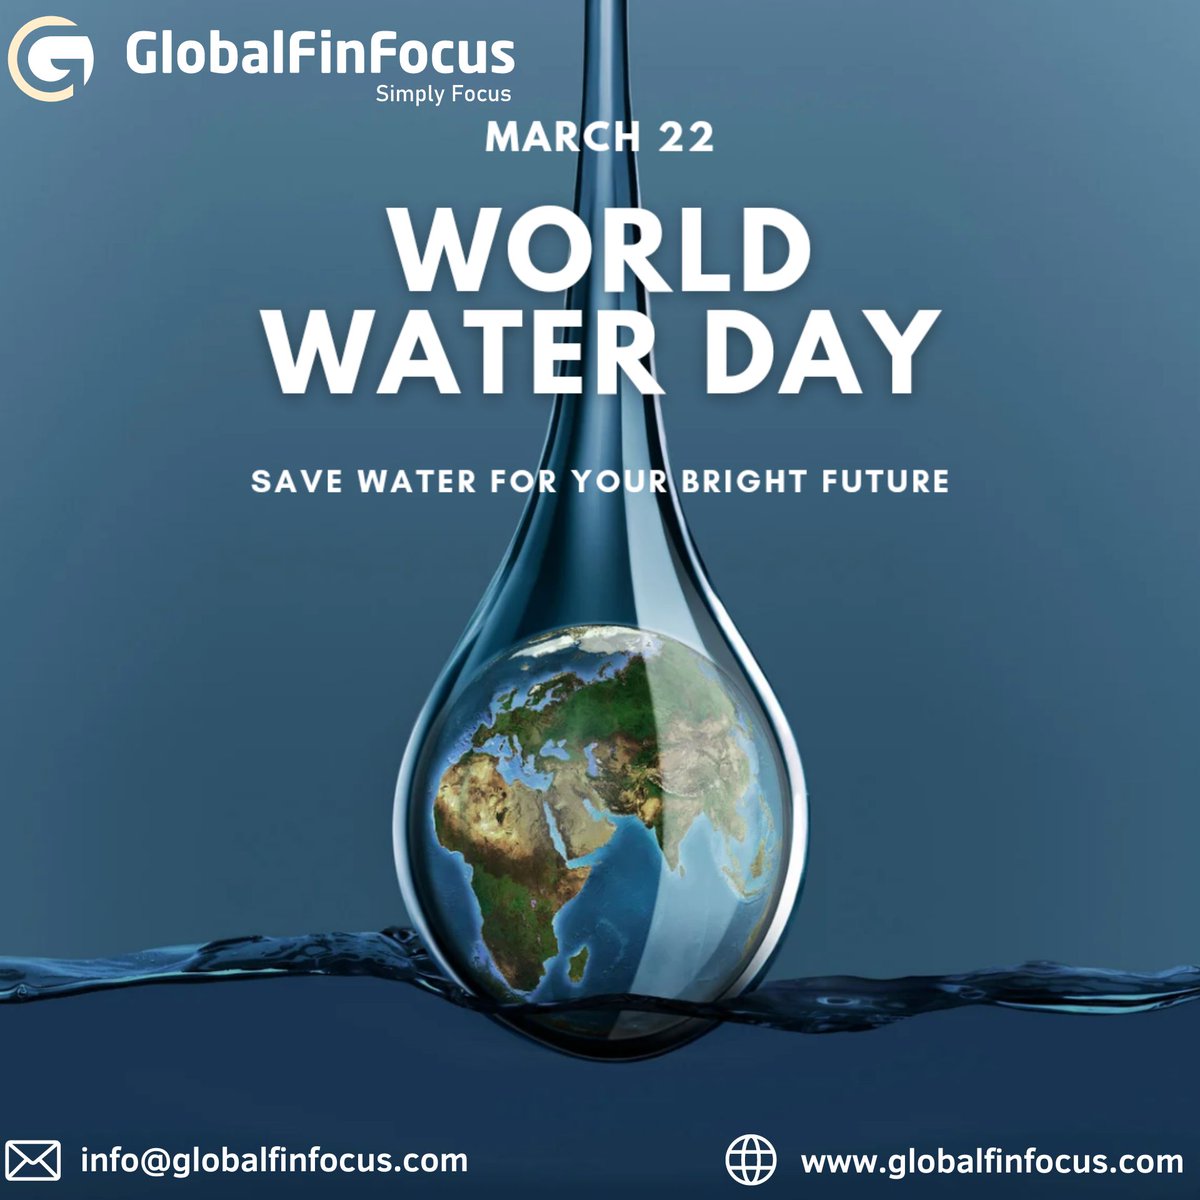 Happy World Water Day! May we all commit to conserving water and protecting our precious water sources.
#BusinessIntelligence #GlobalFinFocus #accounting #BookkeepingSolutions #CPAStressRelief #automation #EfficiencyUnleashed  #backoffice #worldwaterday #waterislife